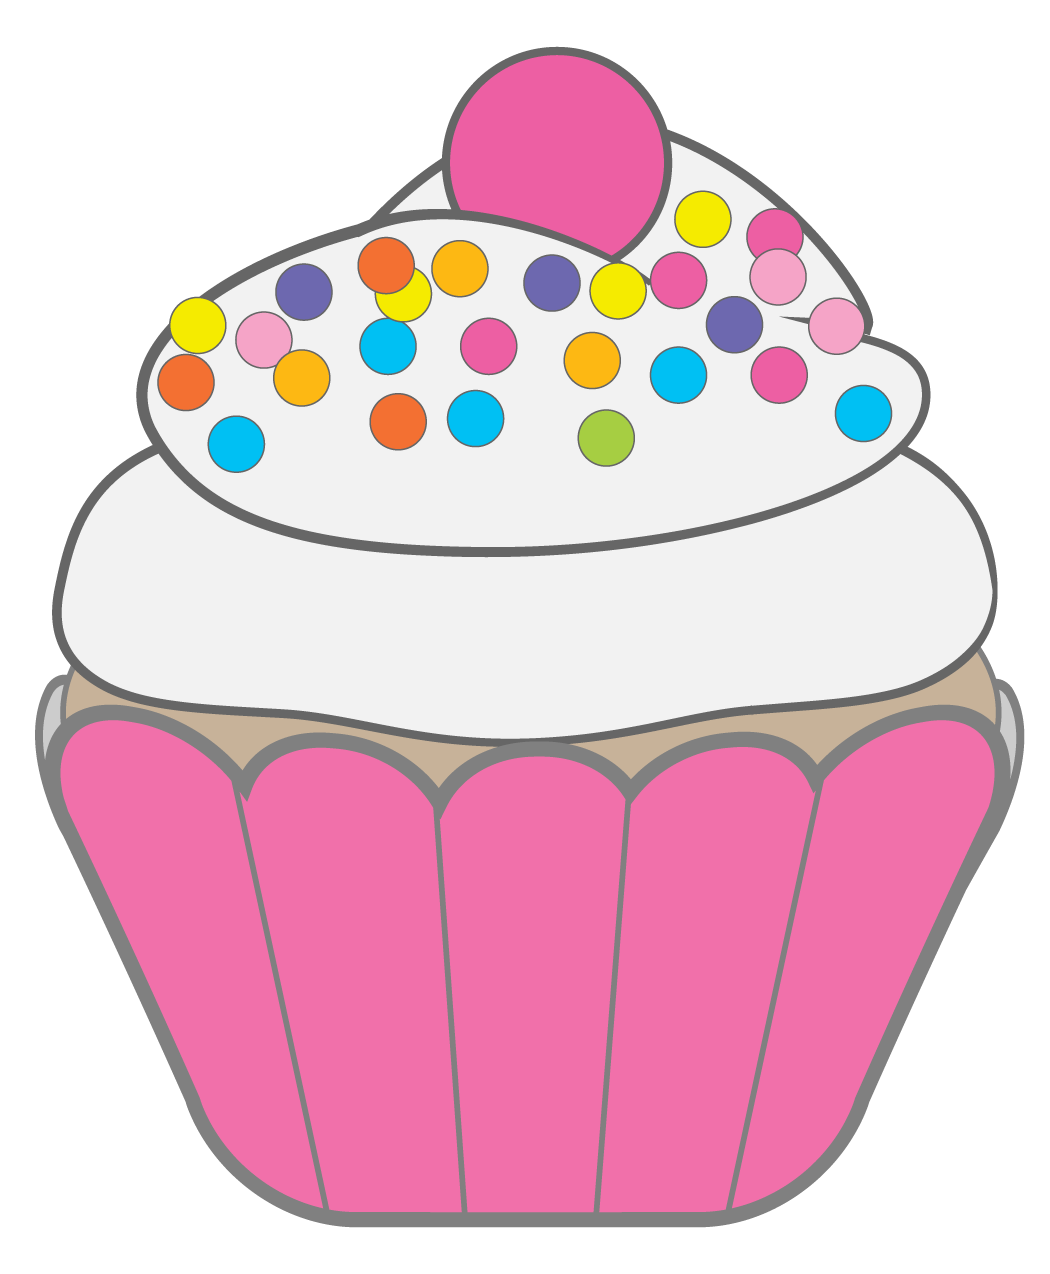 cupcake clipart free download - photo #8